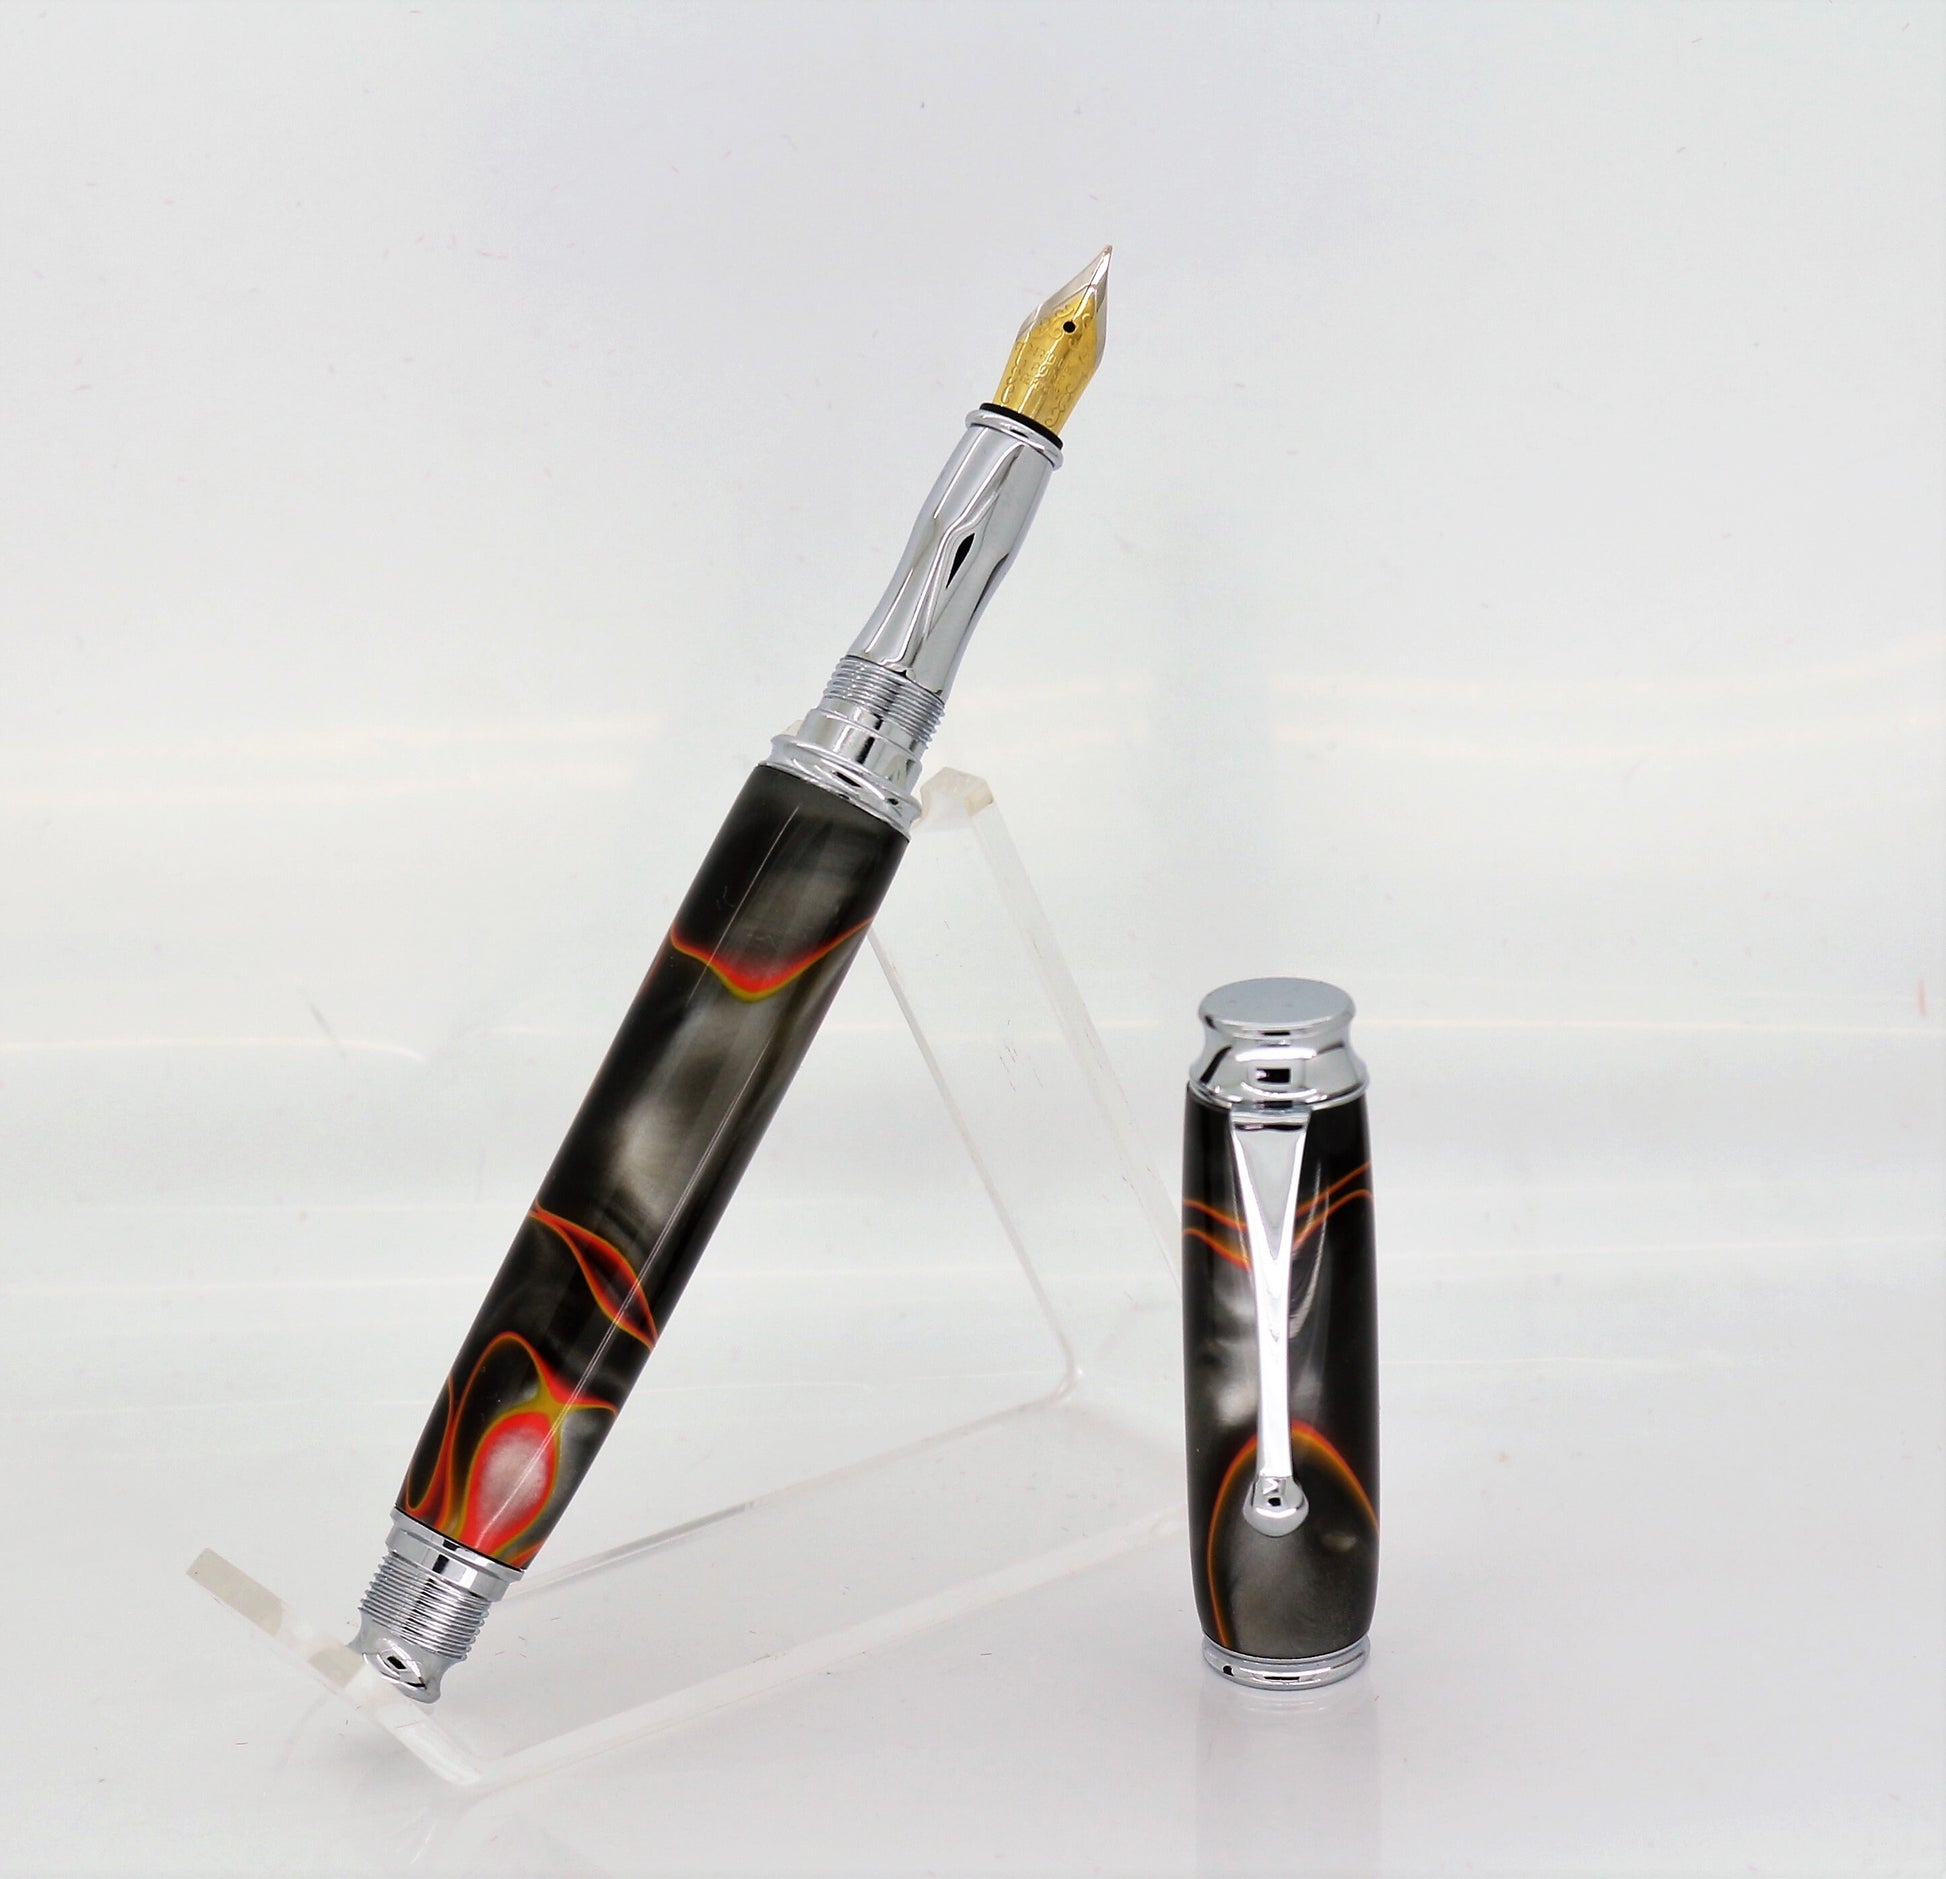 Acrylic Fountain pen  standing on an acrylic clear stand, the pen has chrome plated fittings